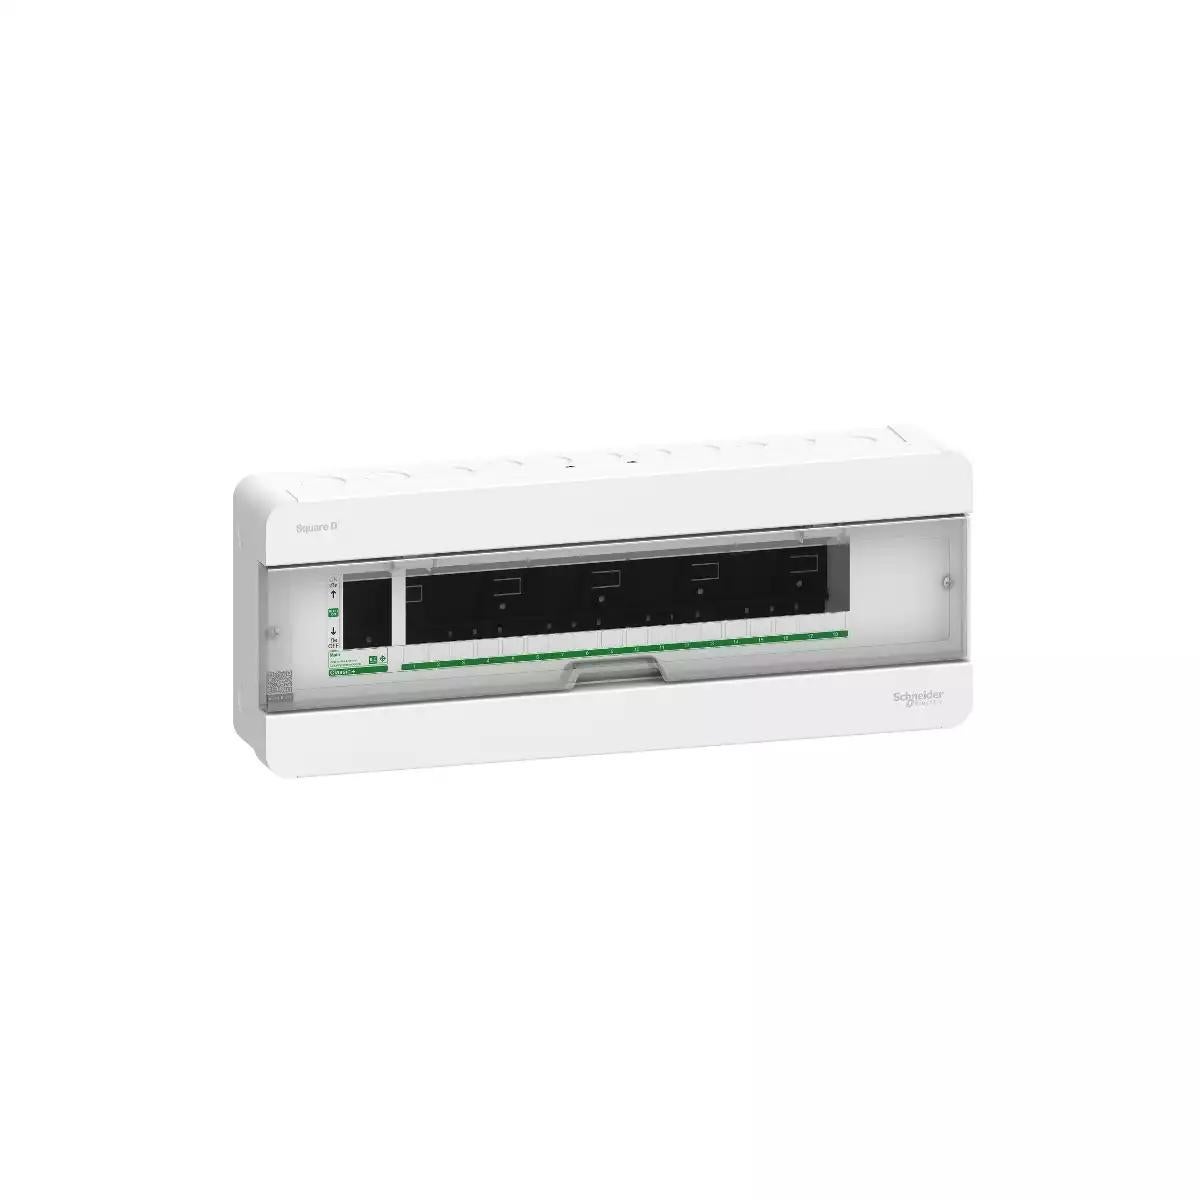 Square D Classic+ Consumer Unit - Surface mounted - 18 ways